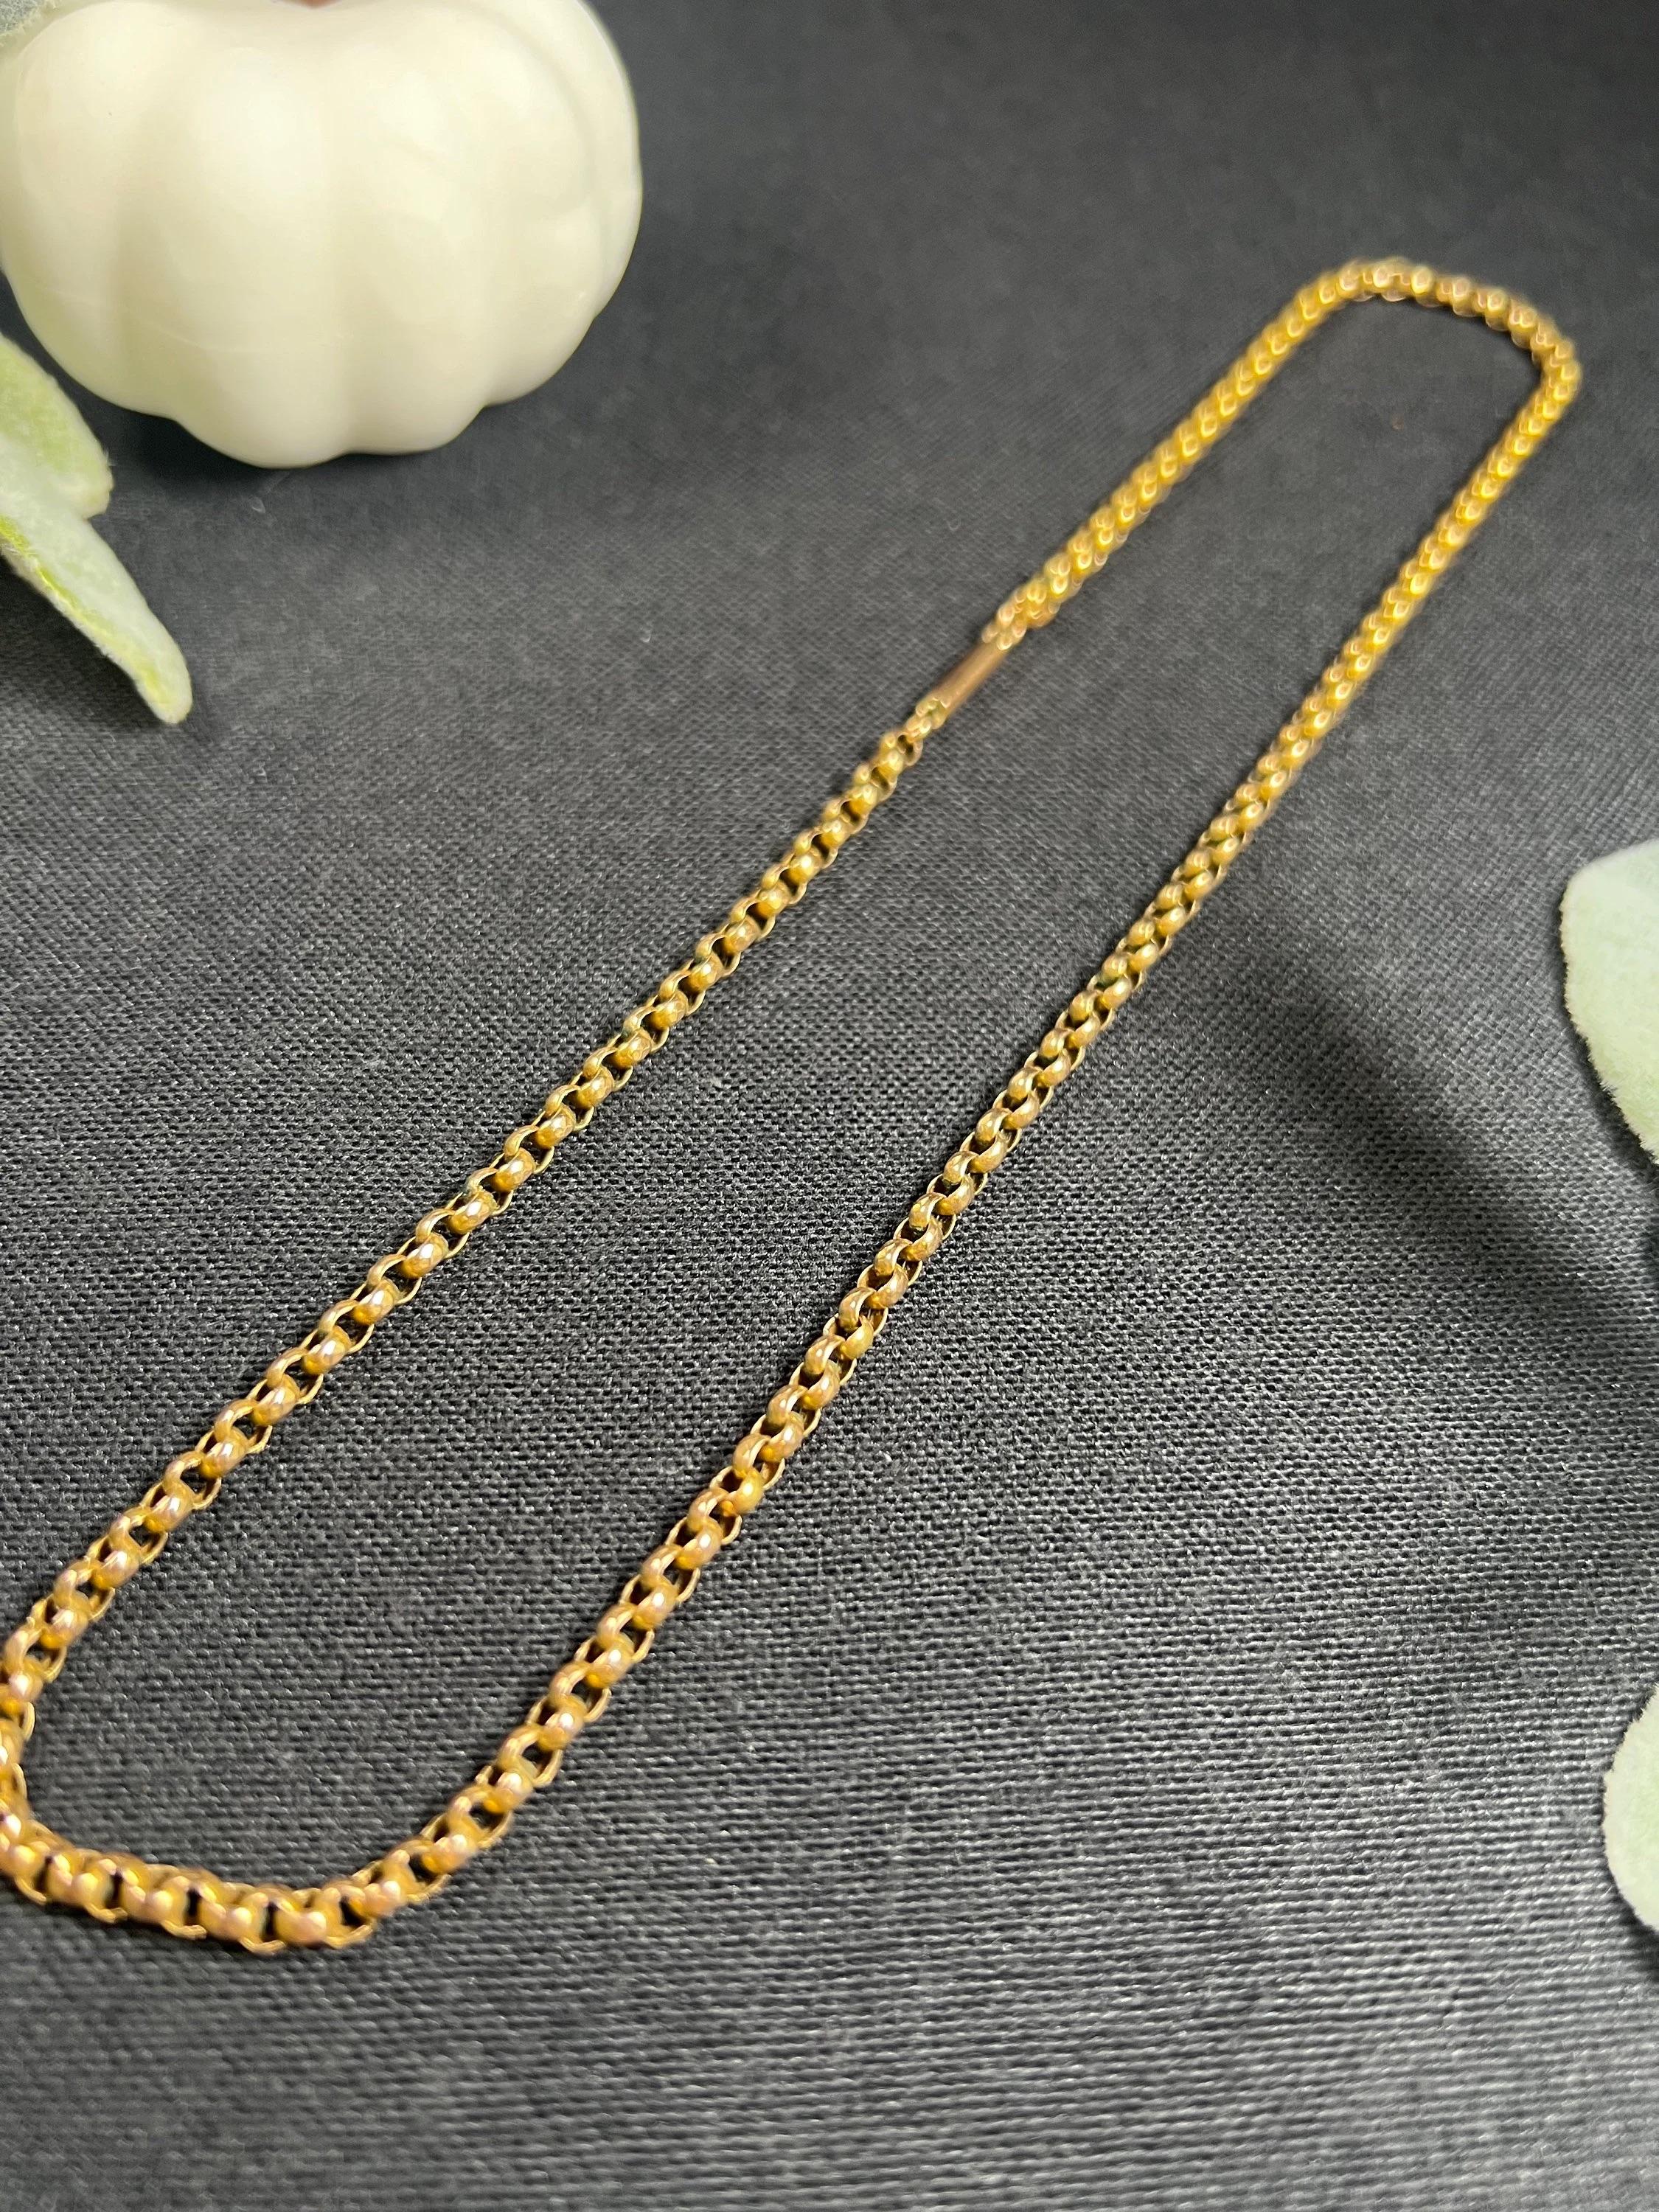 Antique 9ct Gold Edwardian Faceted Belcher Link Chain with Barrel Clasp 4